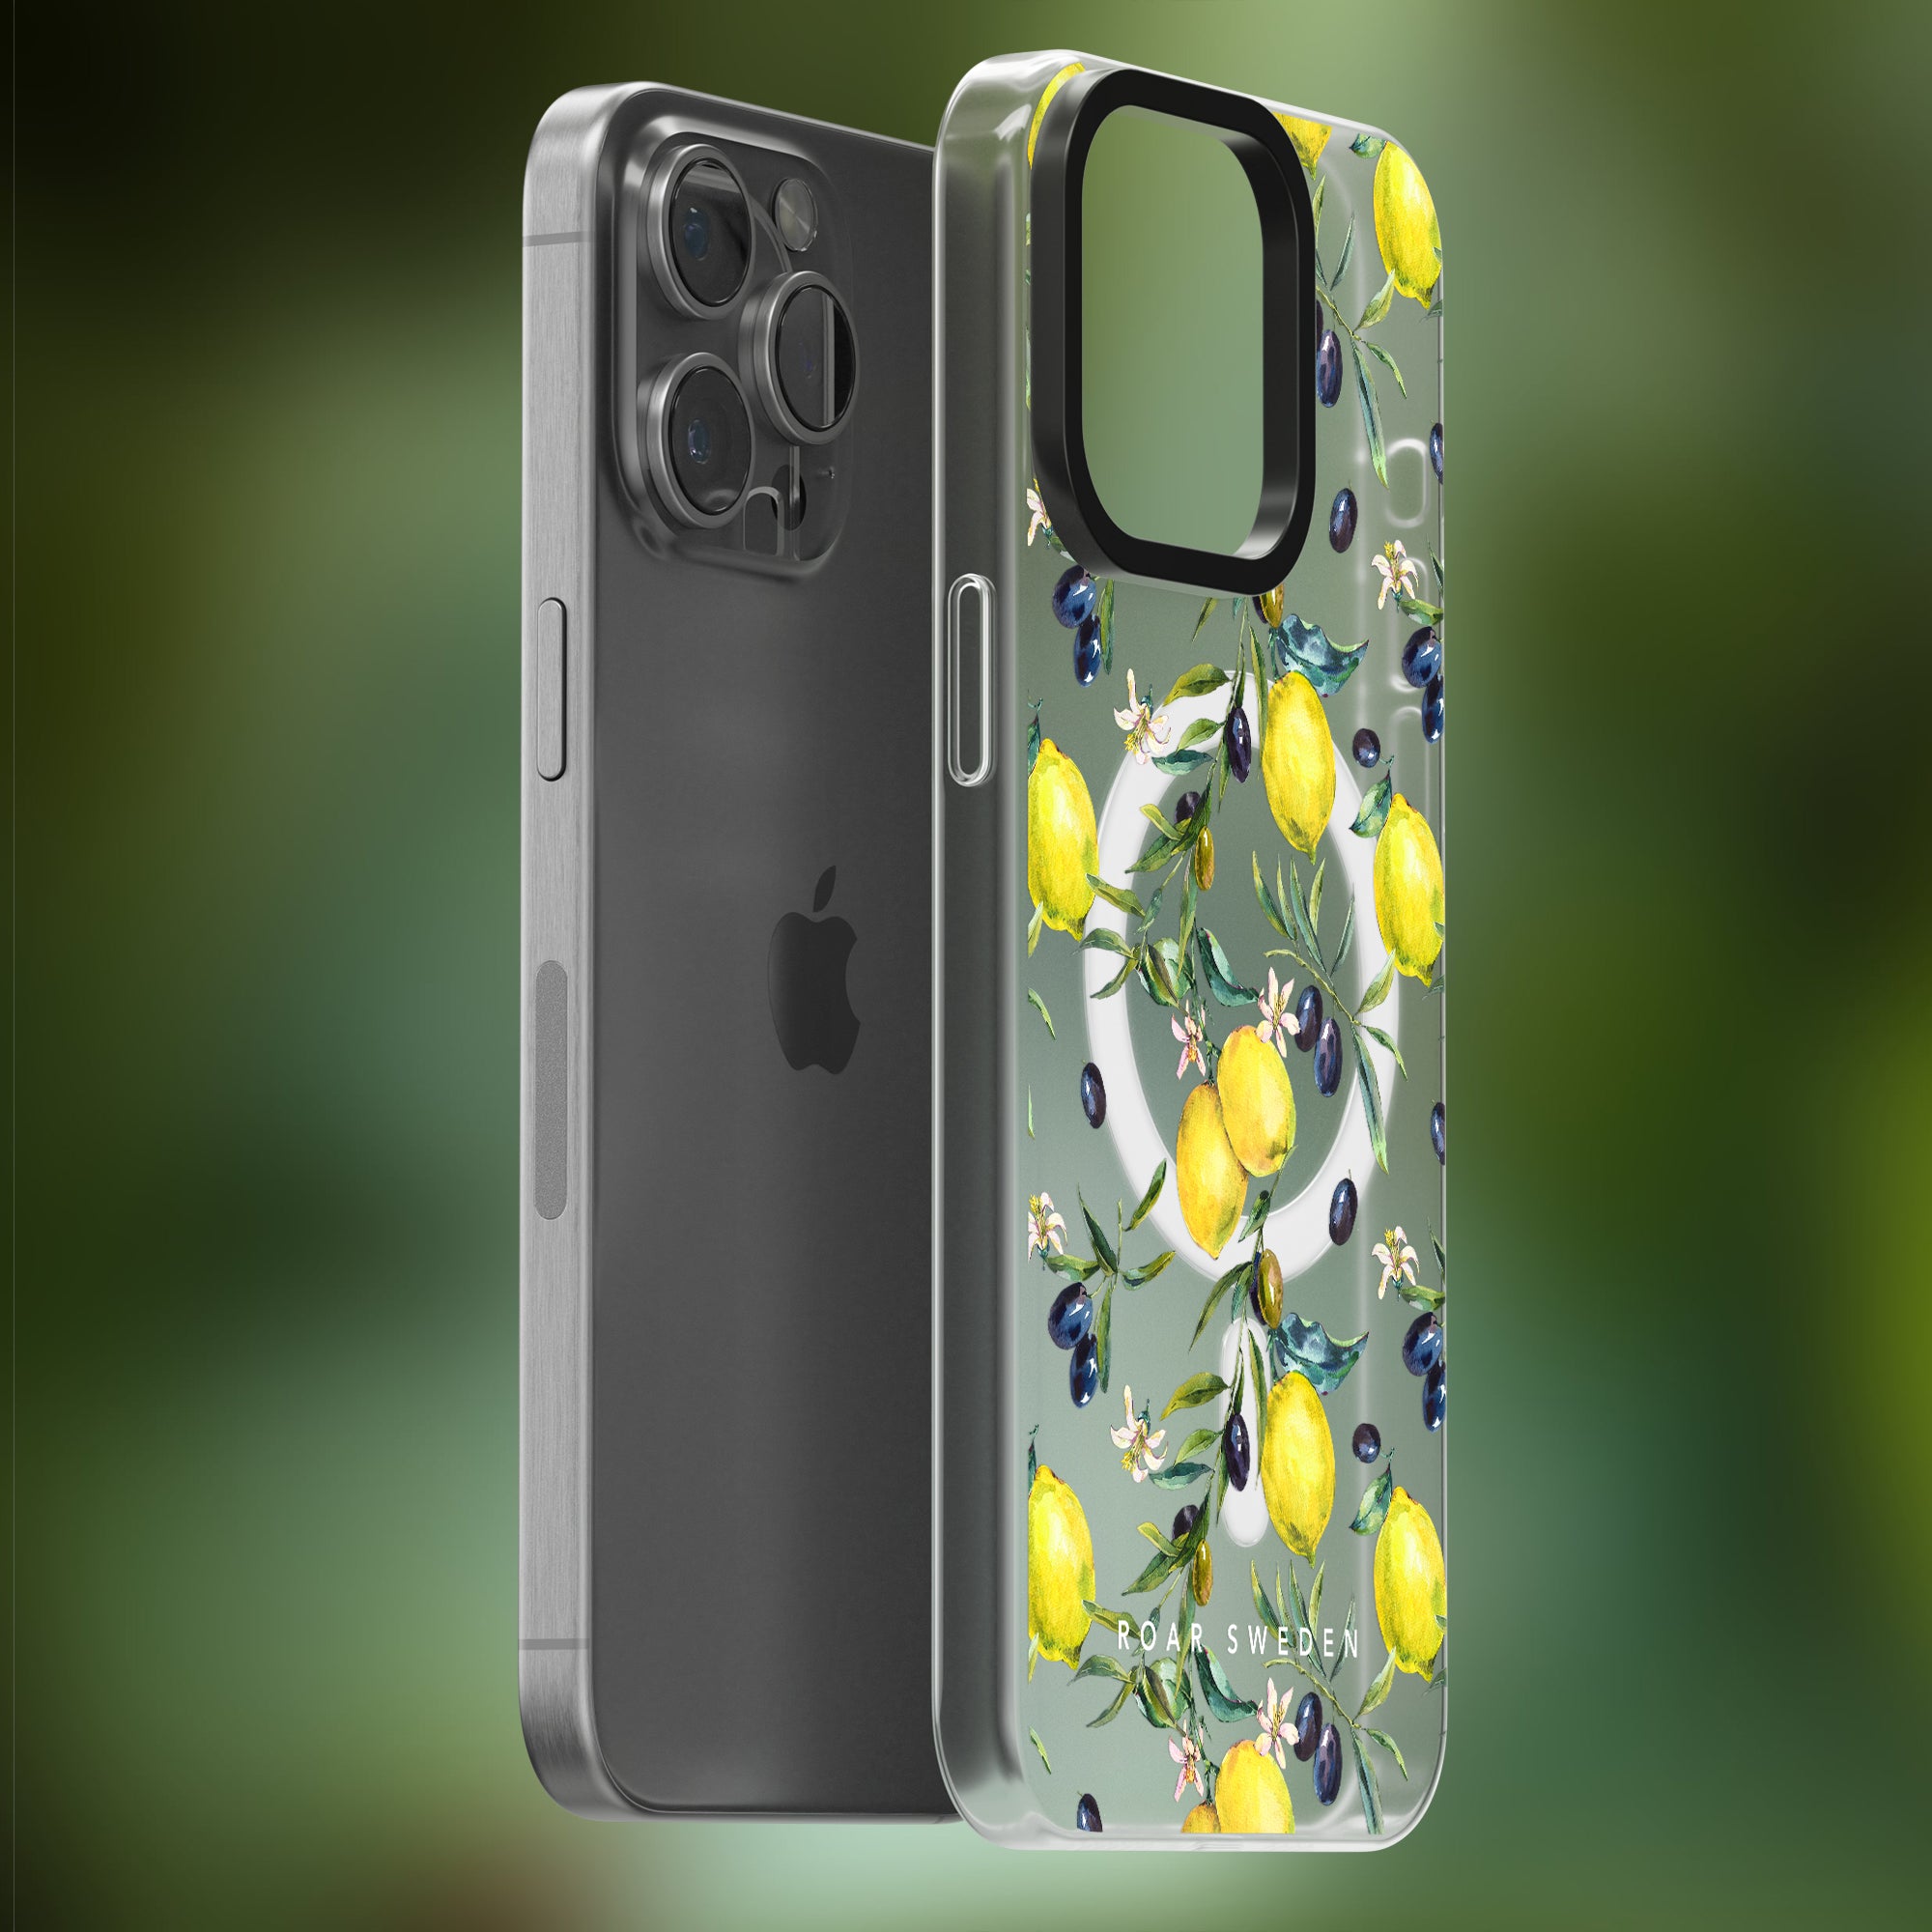 Two iPhones on a blurred green background; one is without a case, while the other boasts a charming Lemon Garden - MagSafe Case, adorned with lemons and olives.